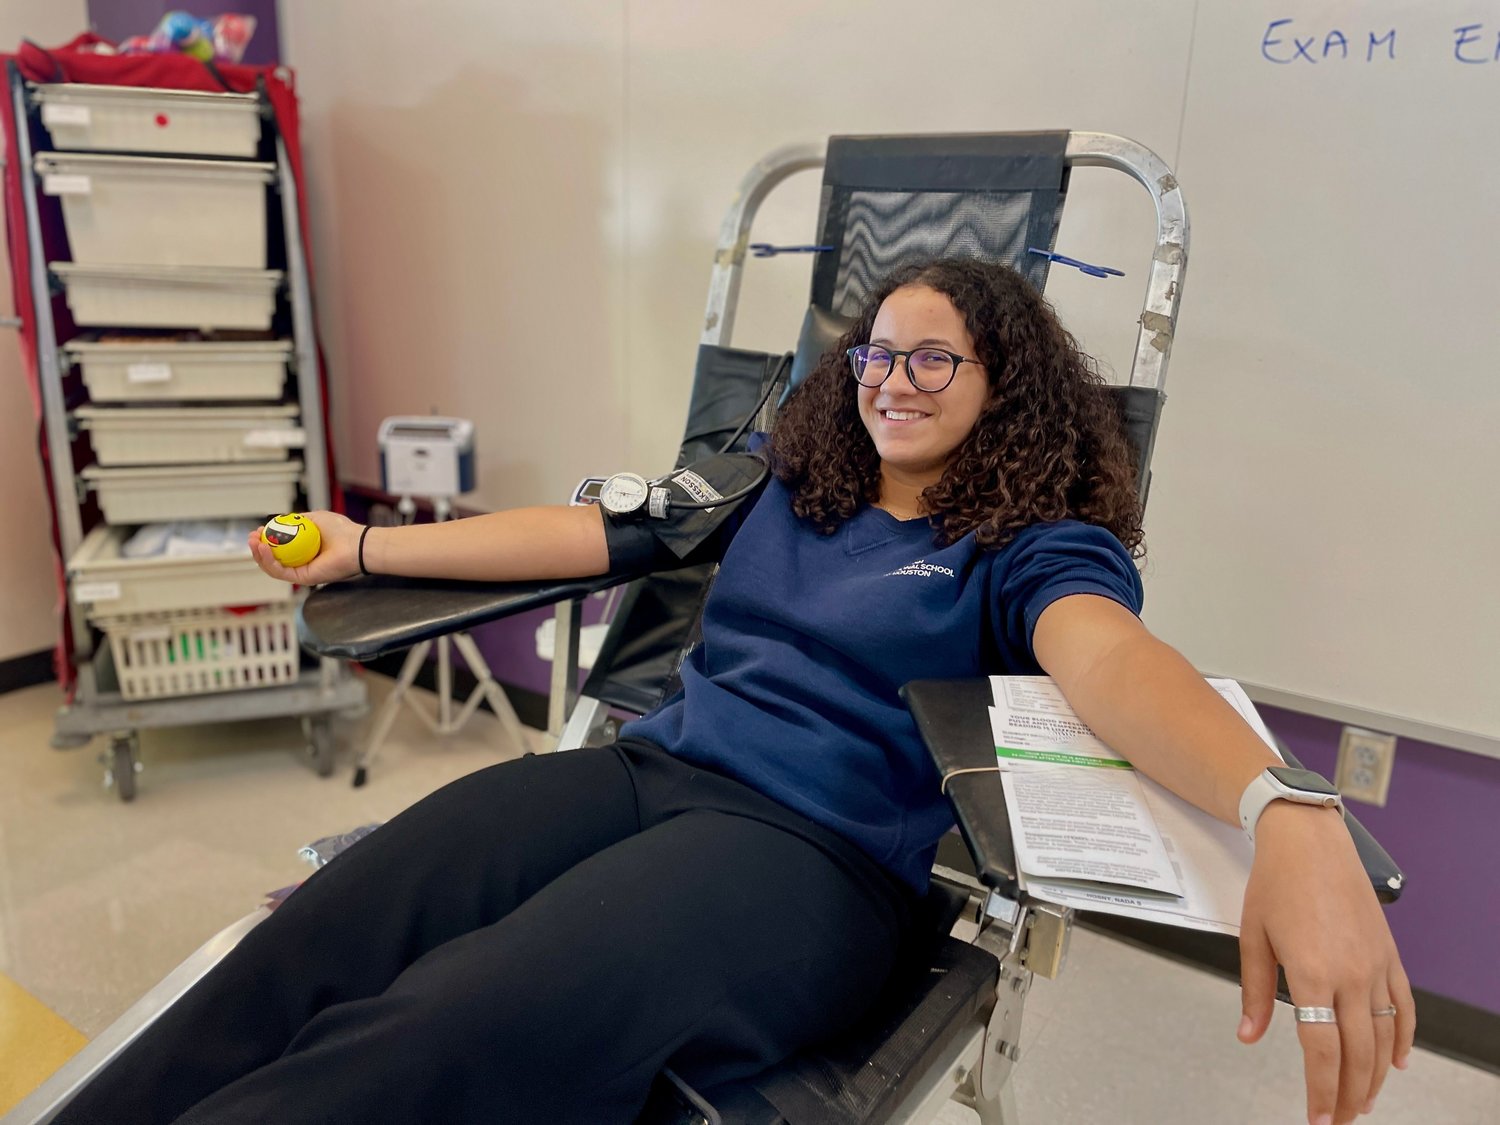 The British International School of Houston in Katy partnered with the Gulf Coast Regional Blood Center to stage a blood drive, held Oct. 25 at the school, 2203 N. Westgreen. This student was among the donors.